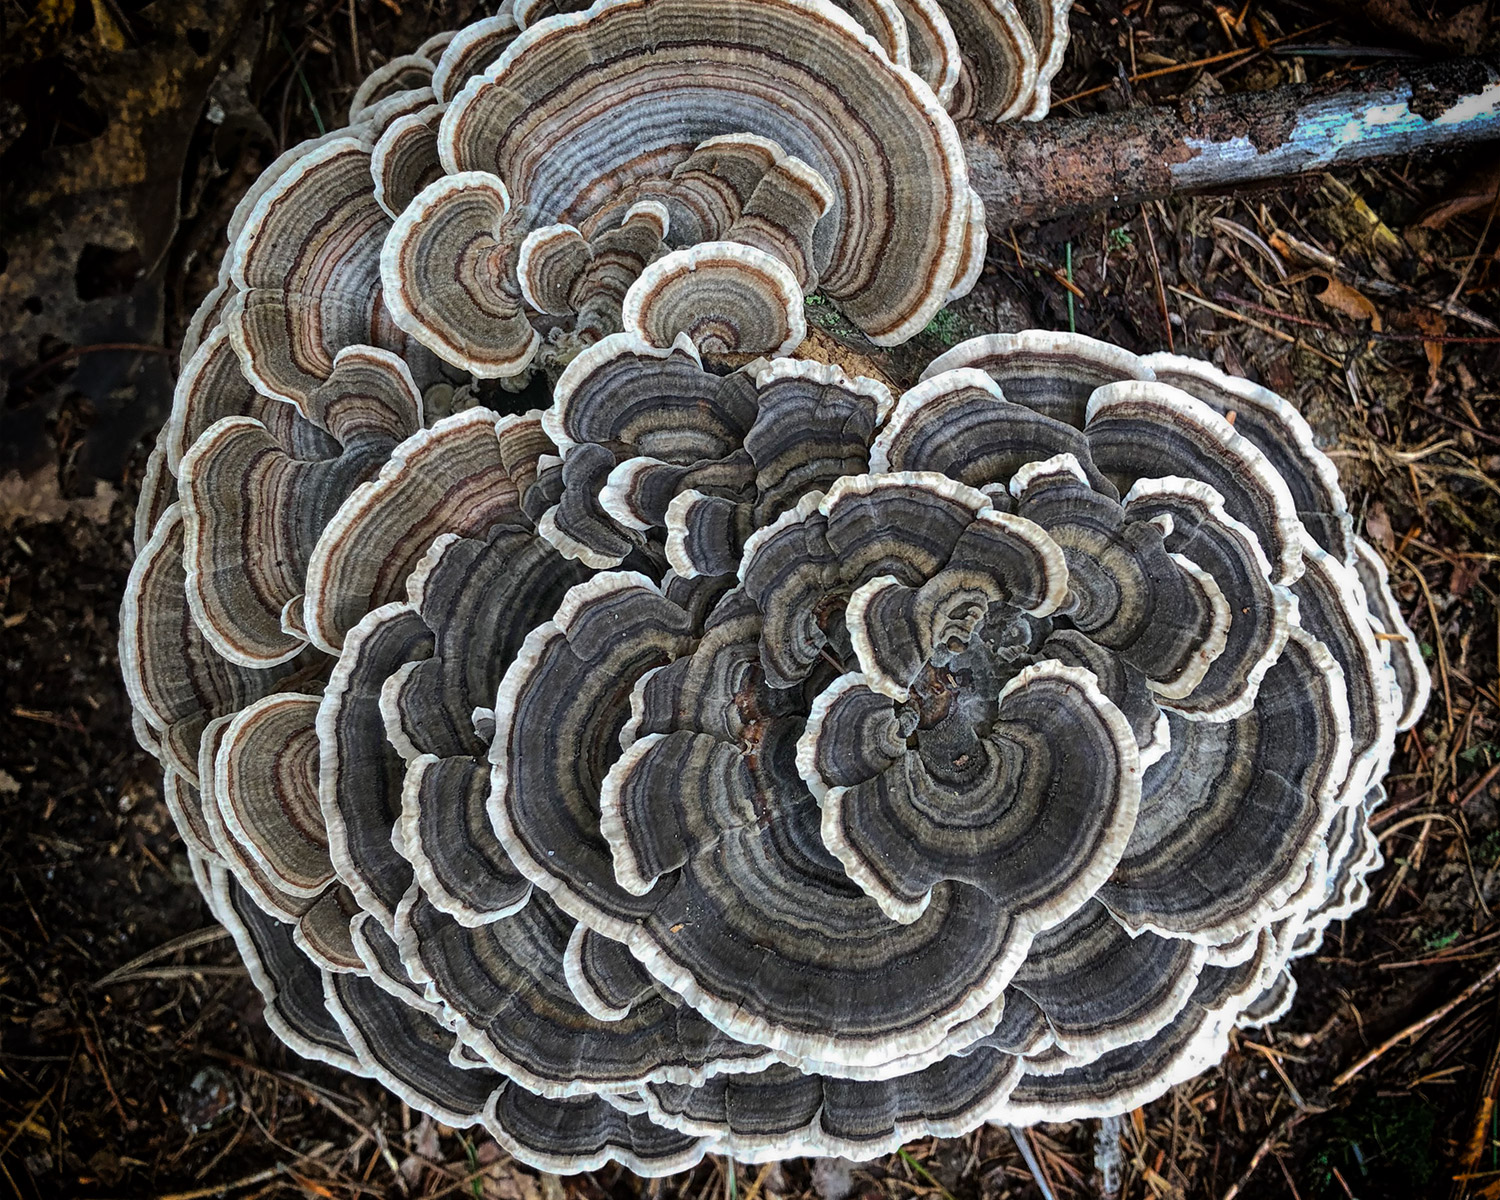 A brown and white fungus growing on a woodland floor in spiraled layers